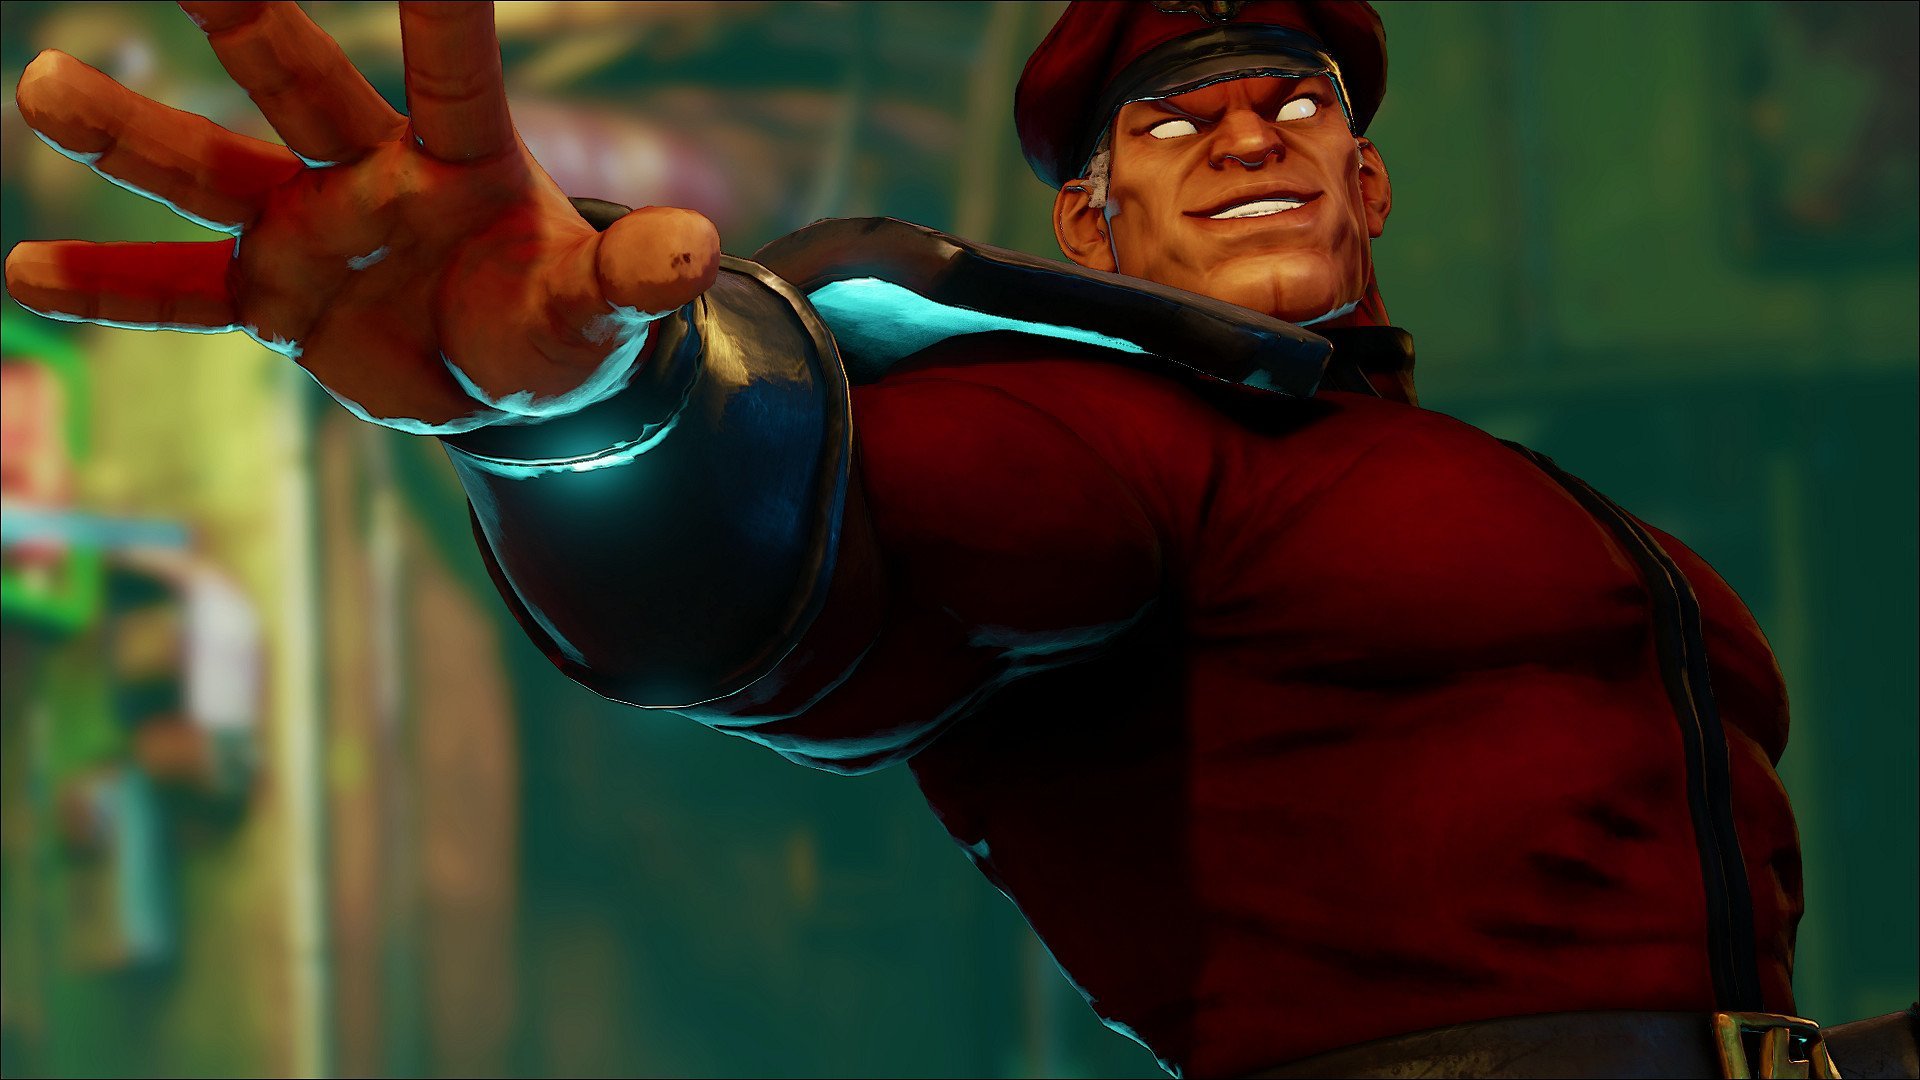 Download full hd 1080p Street Fighter 5 desktop background ID:470089 for free